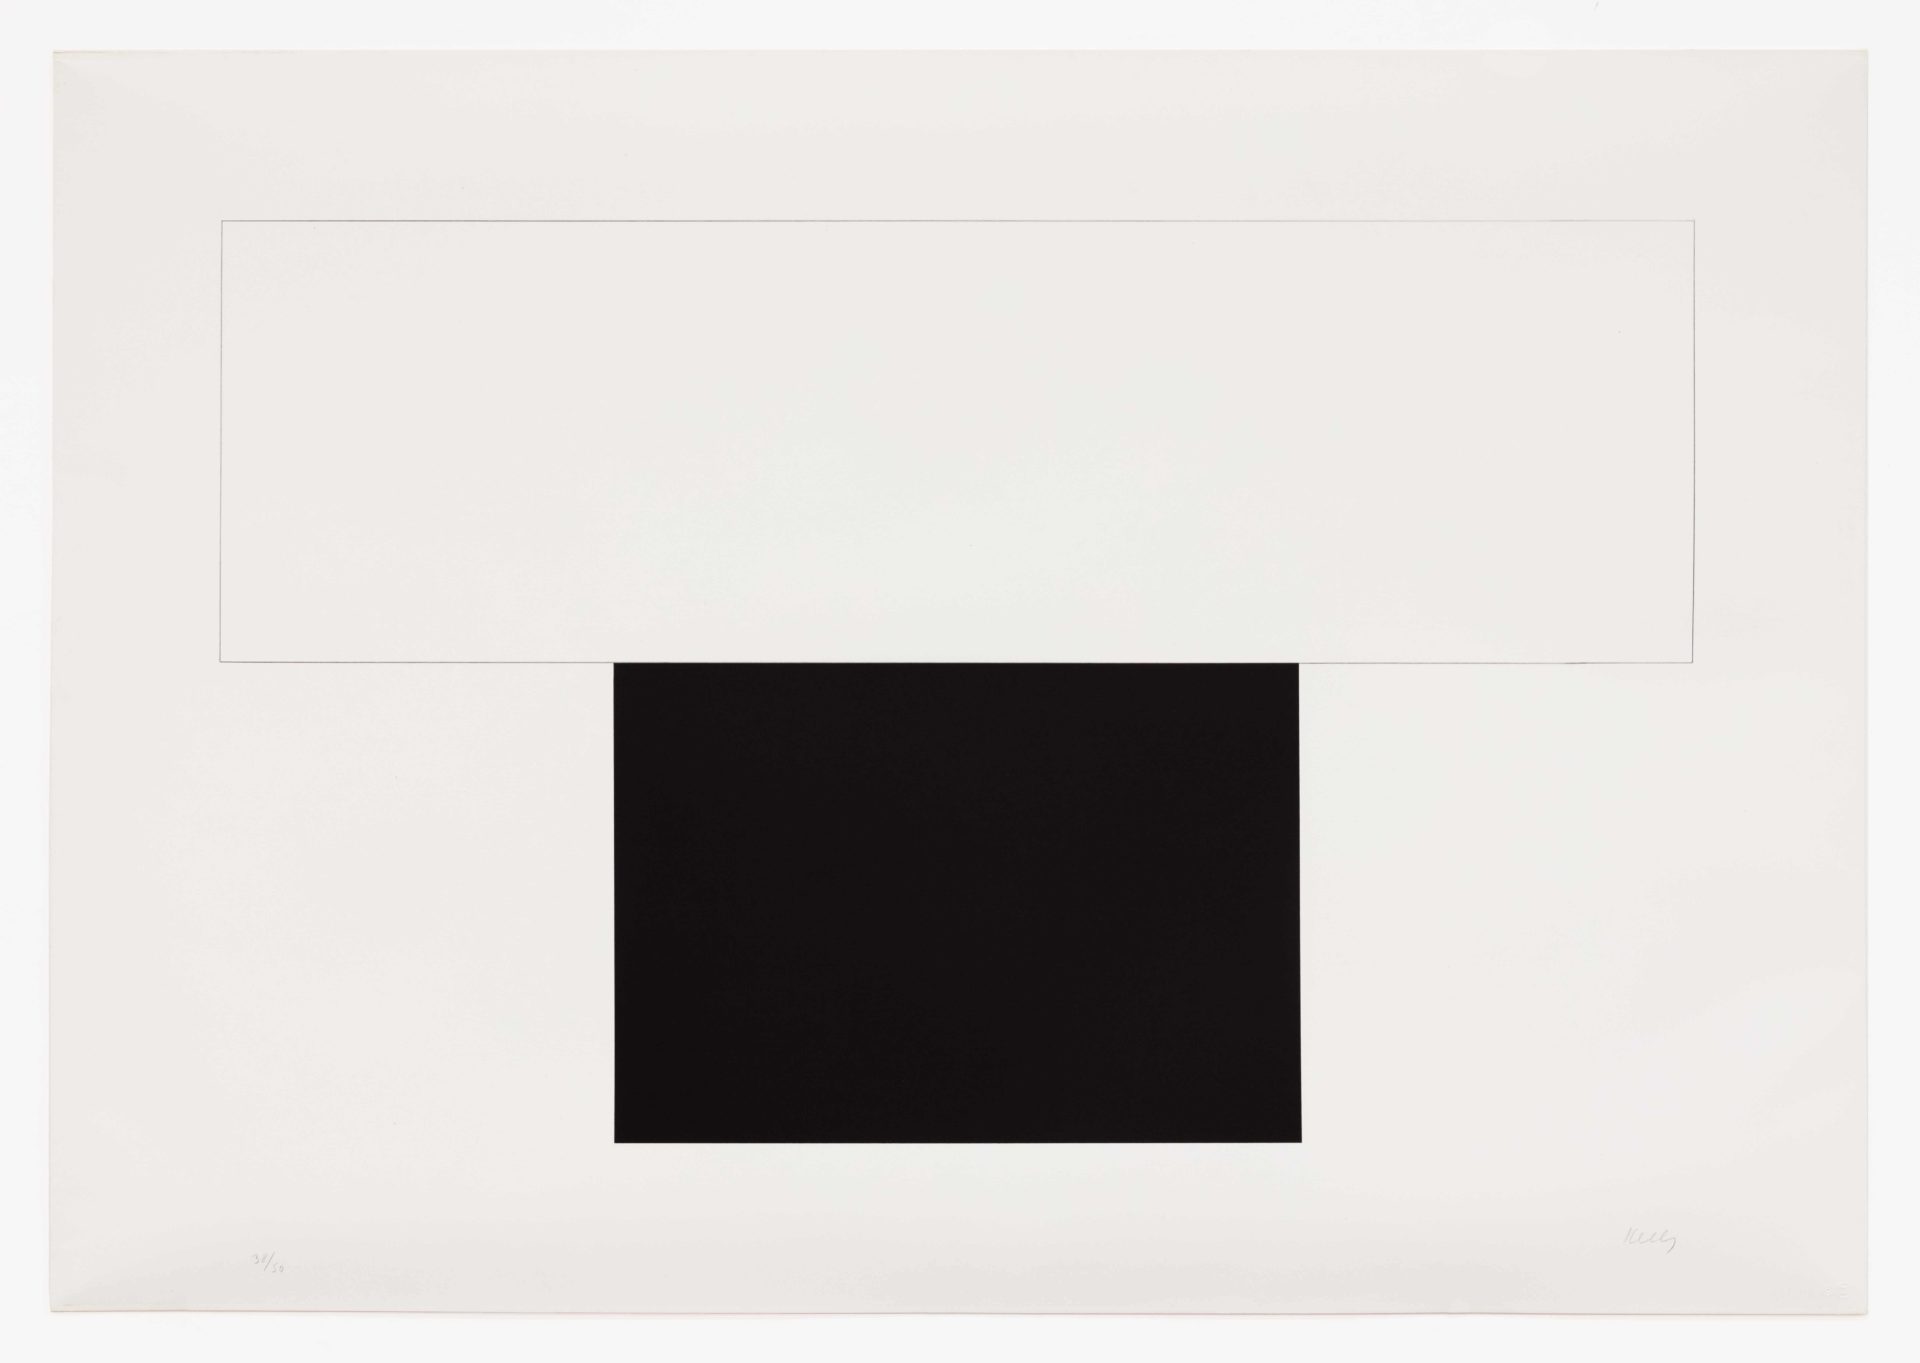 Ellsworth Kelly White Bar with Black, 1973 Lithograph 29 1/2 x 42 1/8 inches (74.9 x 107 cm) Edition 38 of 50